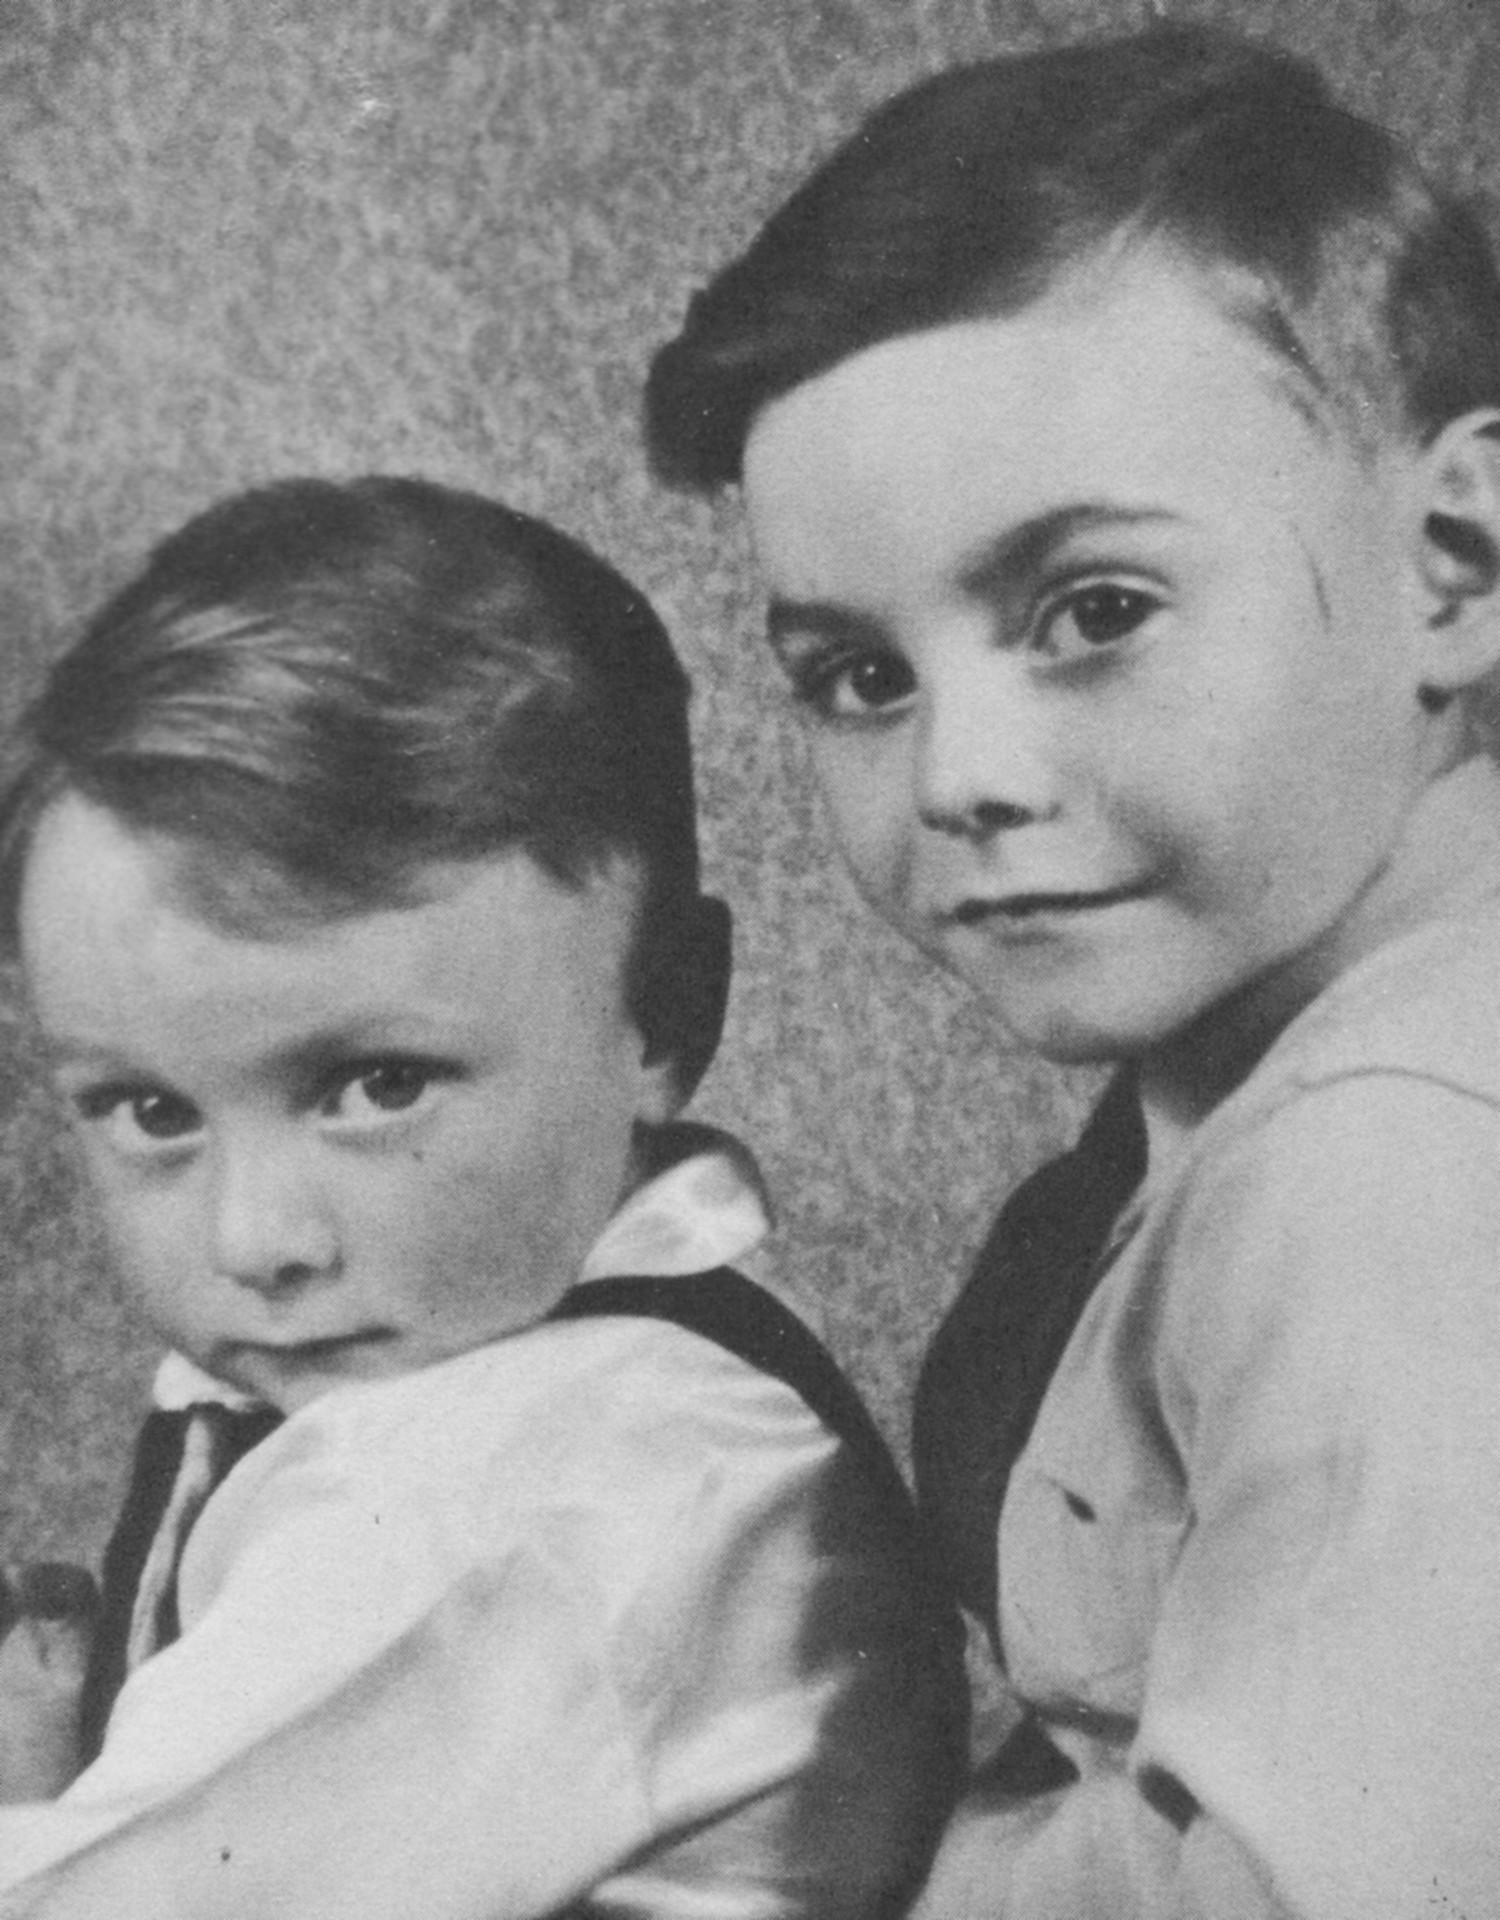 Gavin & Iain, while really quite young.